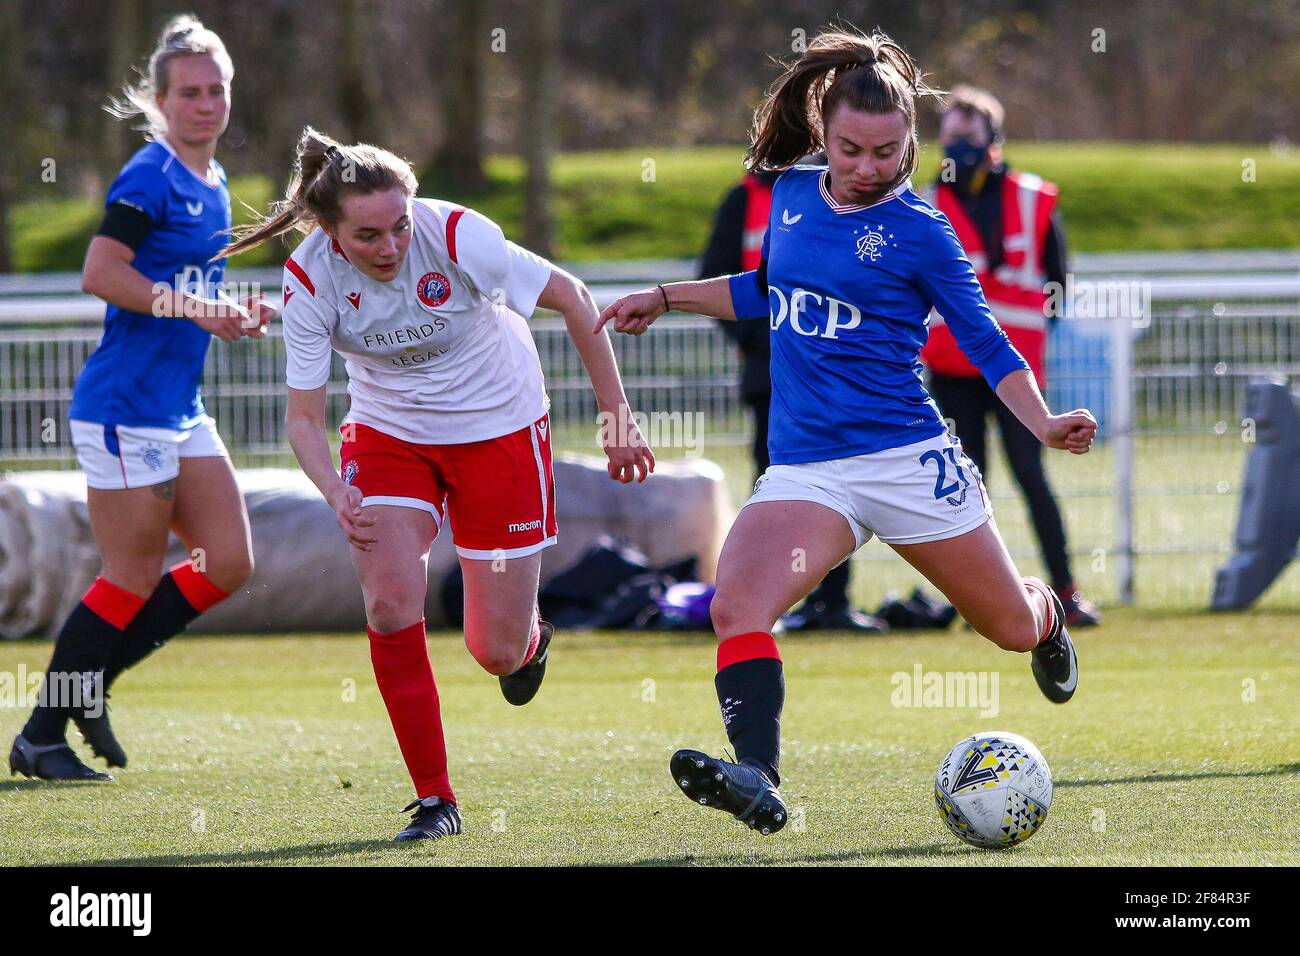 Glasgow, UK. 11th Apr, 2021. Kirsty Howart (#21) of Rangers Women FC with a shot at goal during the Scottish Building Society SWPL1 Fixture Rangers FC vs Spartans FC at Rangers Training Centre, Glasgow, 11/04/2021 | Images courtesy of www.collargeimages.co.uk Credit: Colin Poultney/Alamy Live News Stock Photo